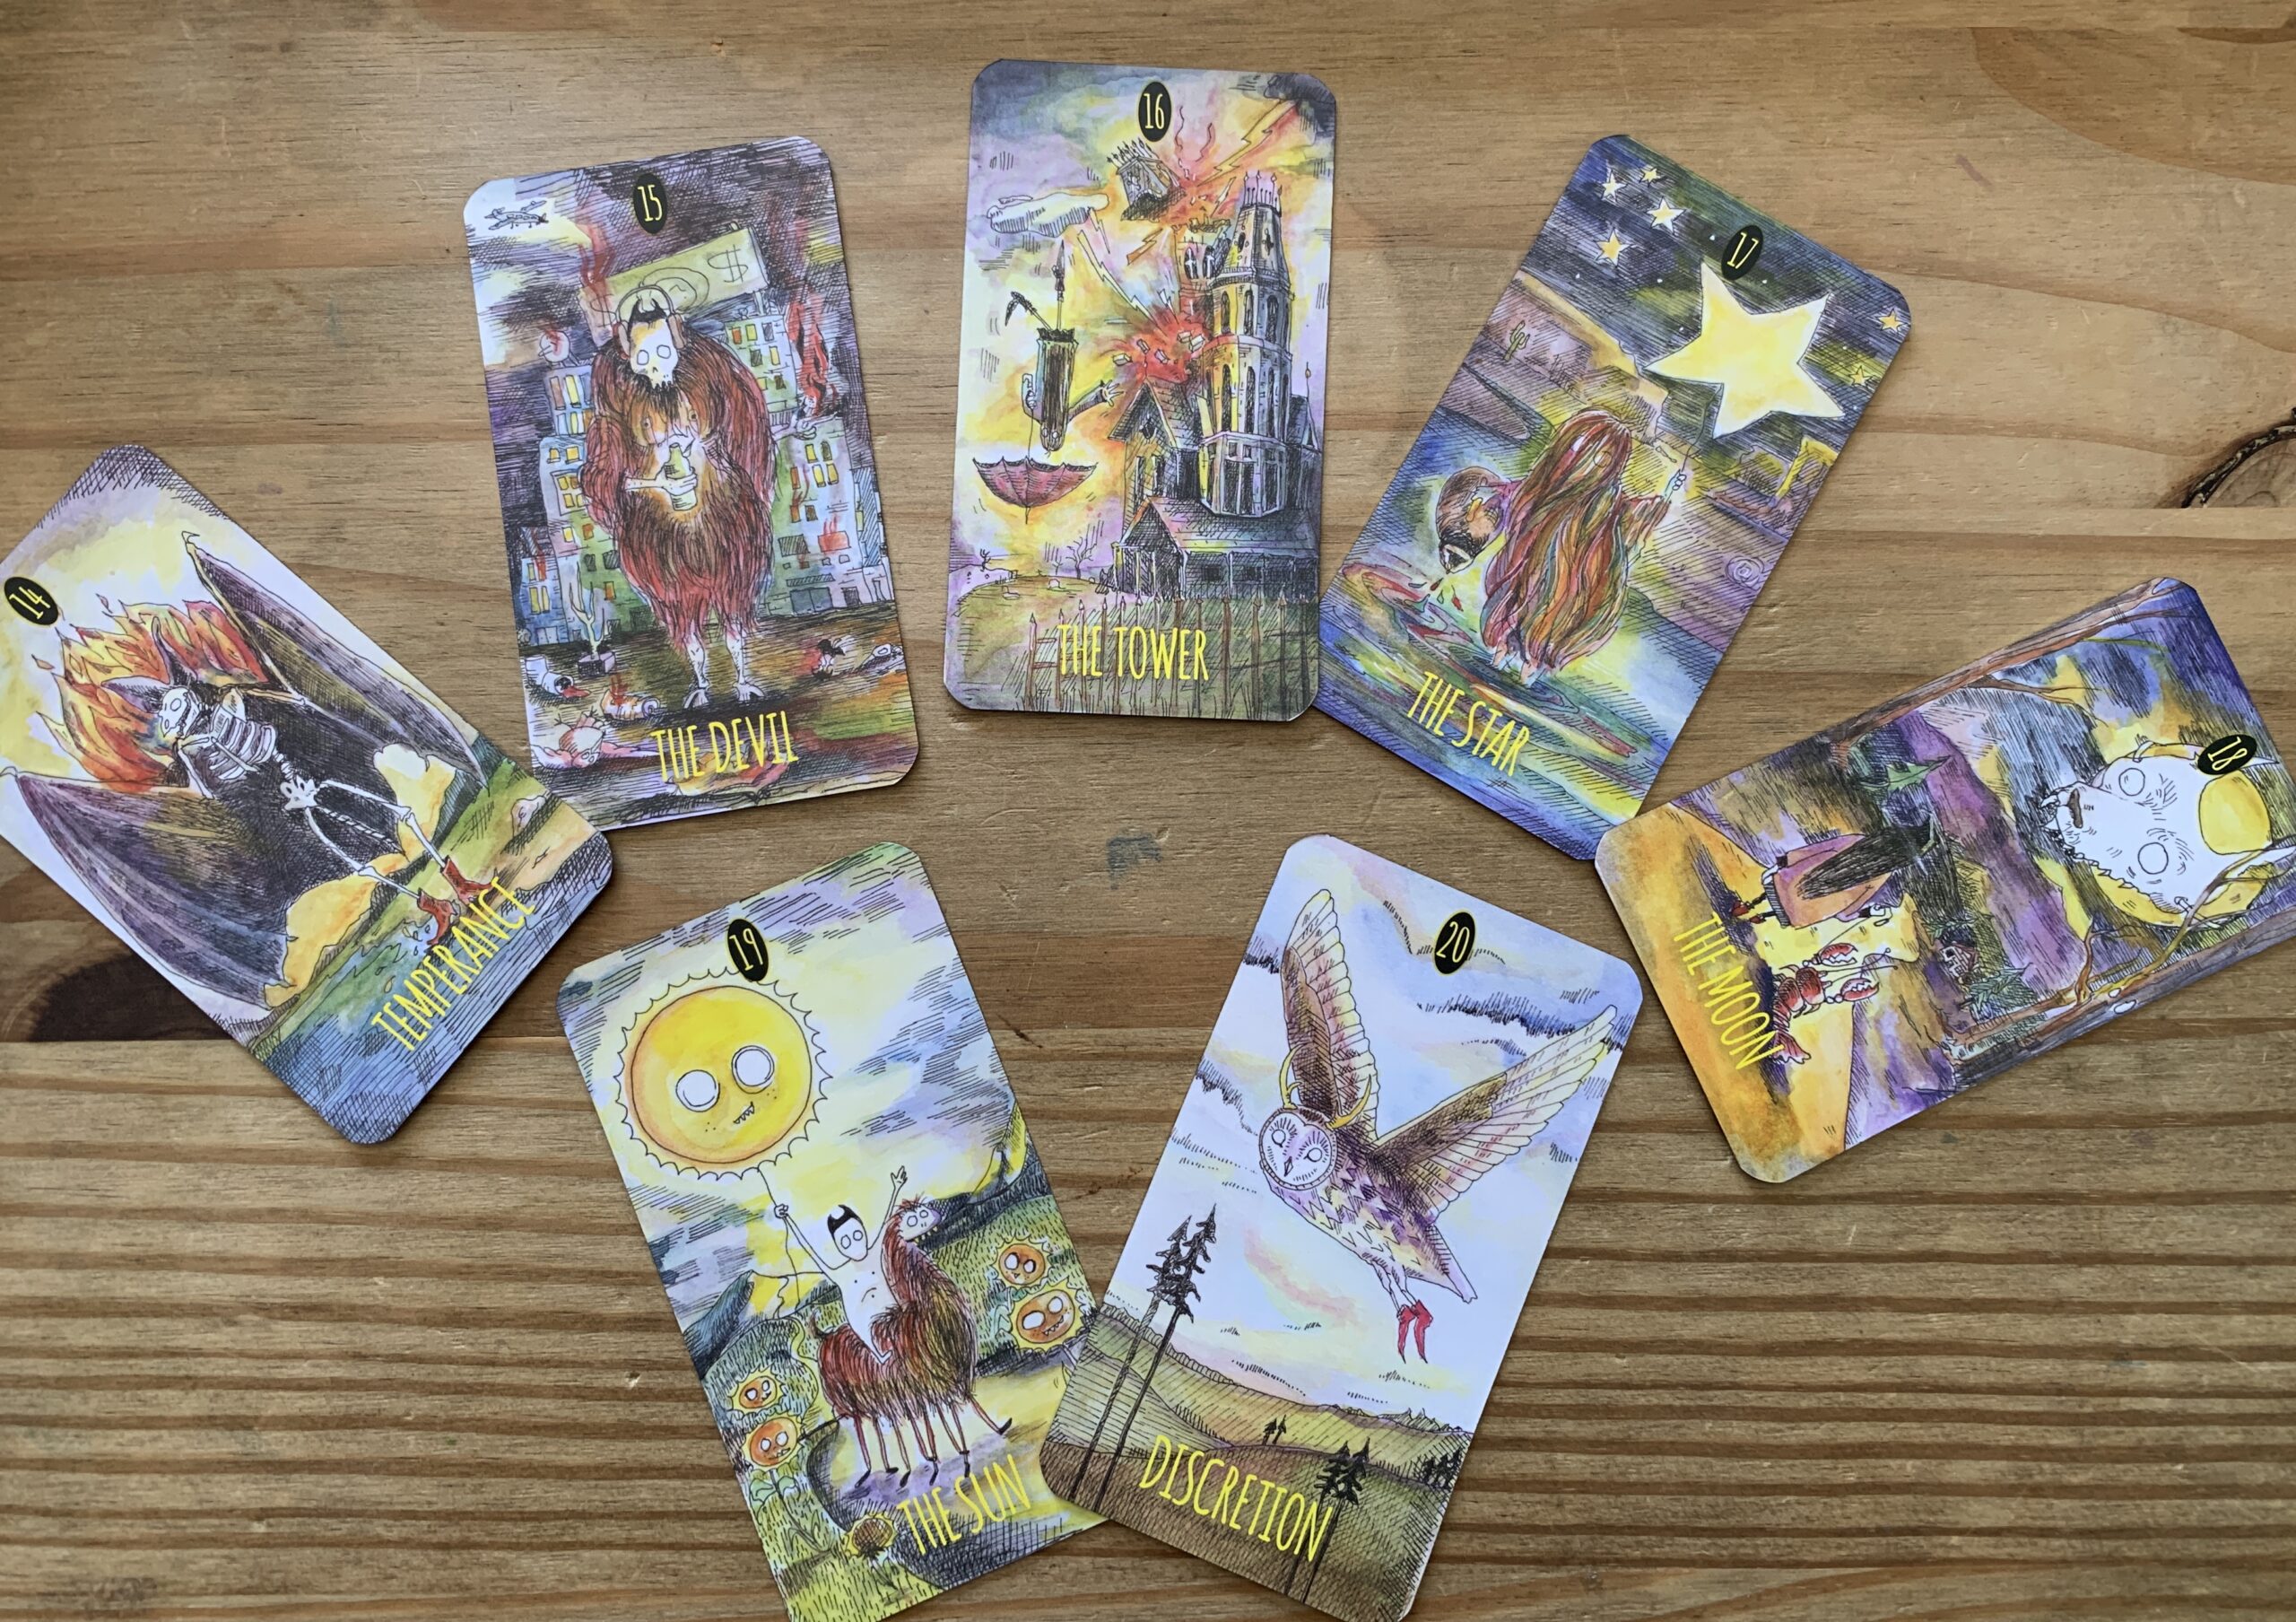 Reviewing & Reading With Monica Bodirsky's Shadowland Tarot